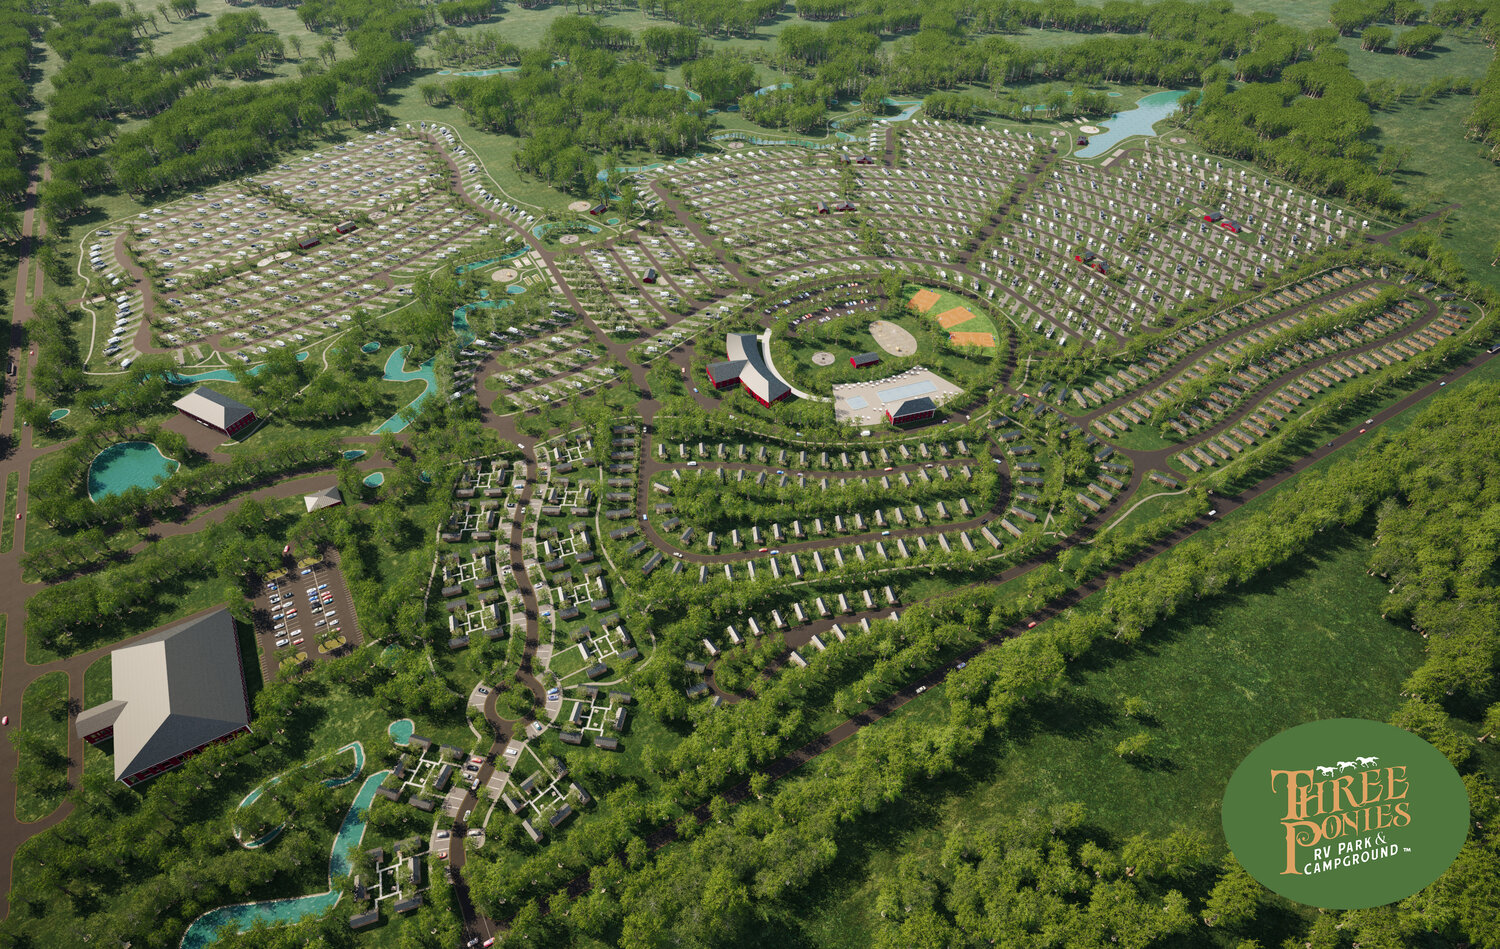 An artist rendering depicts an aerial view of the Three Ponies RV Park, which will be built in conjunction with the American Heartland Theme Park and Resort outside of Vinita, Oklahoma.